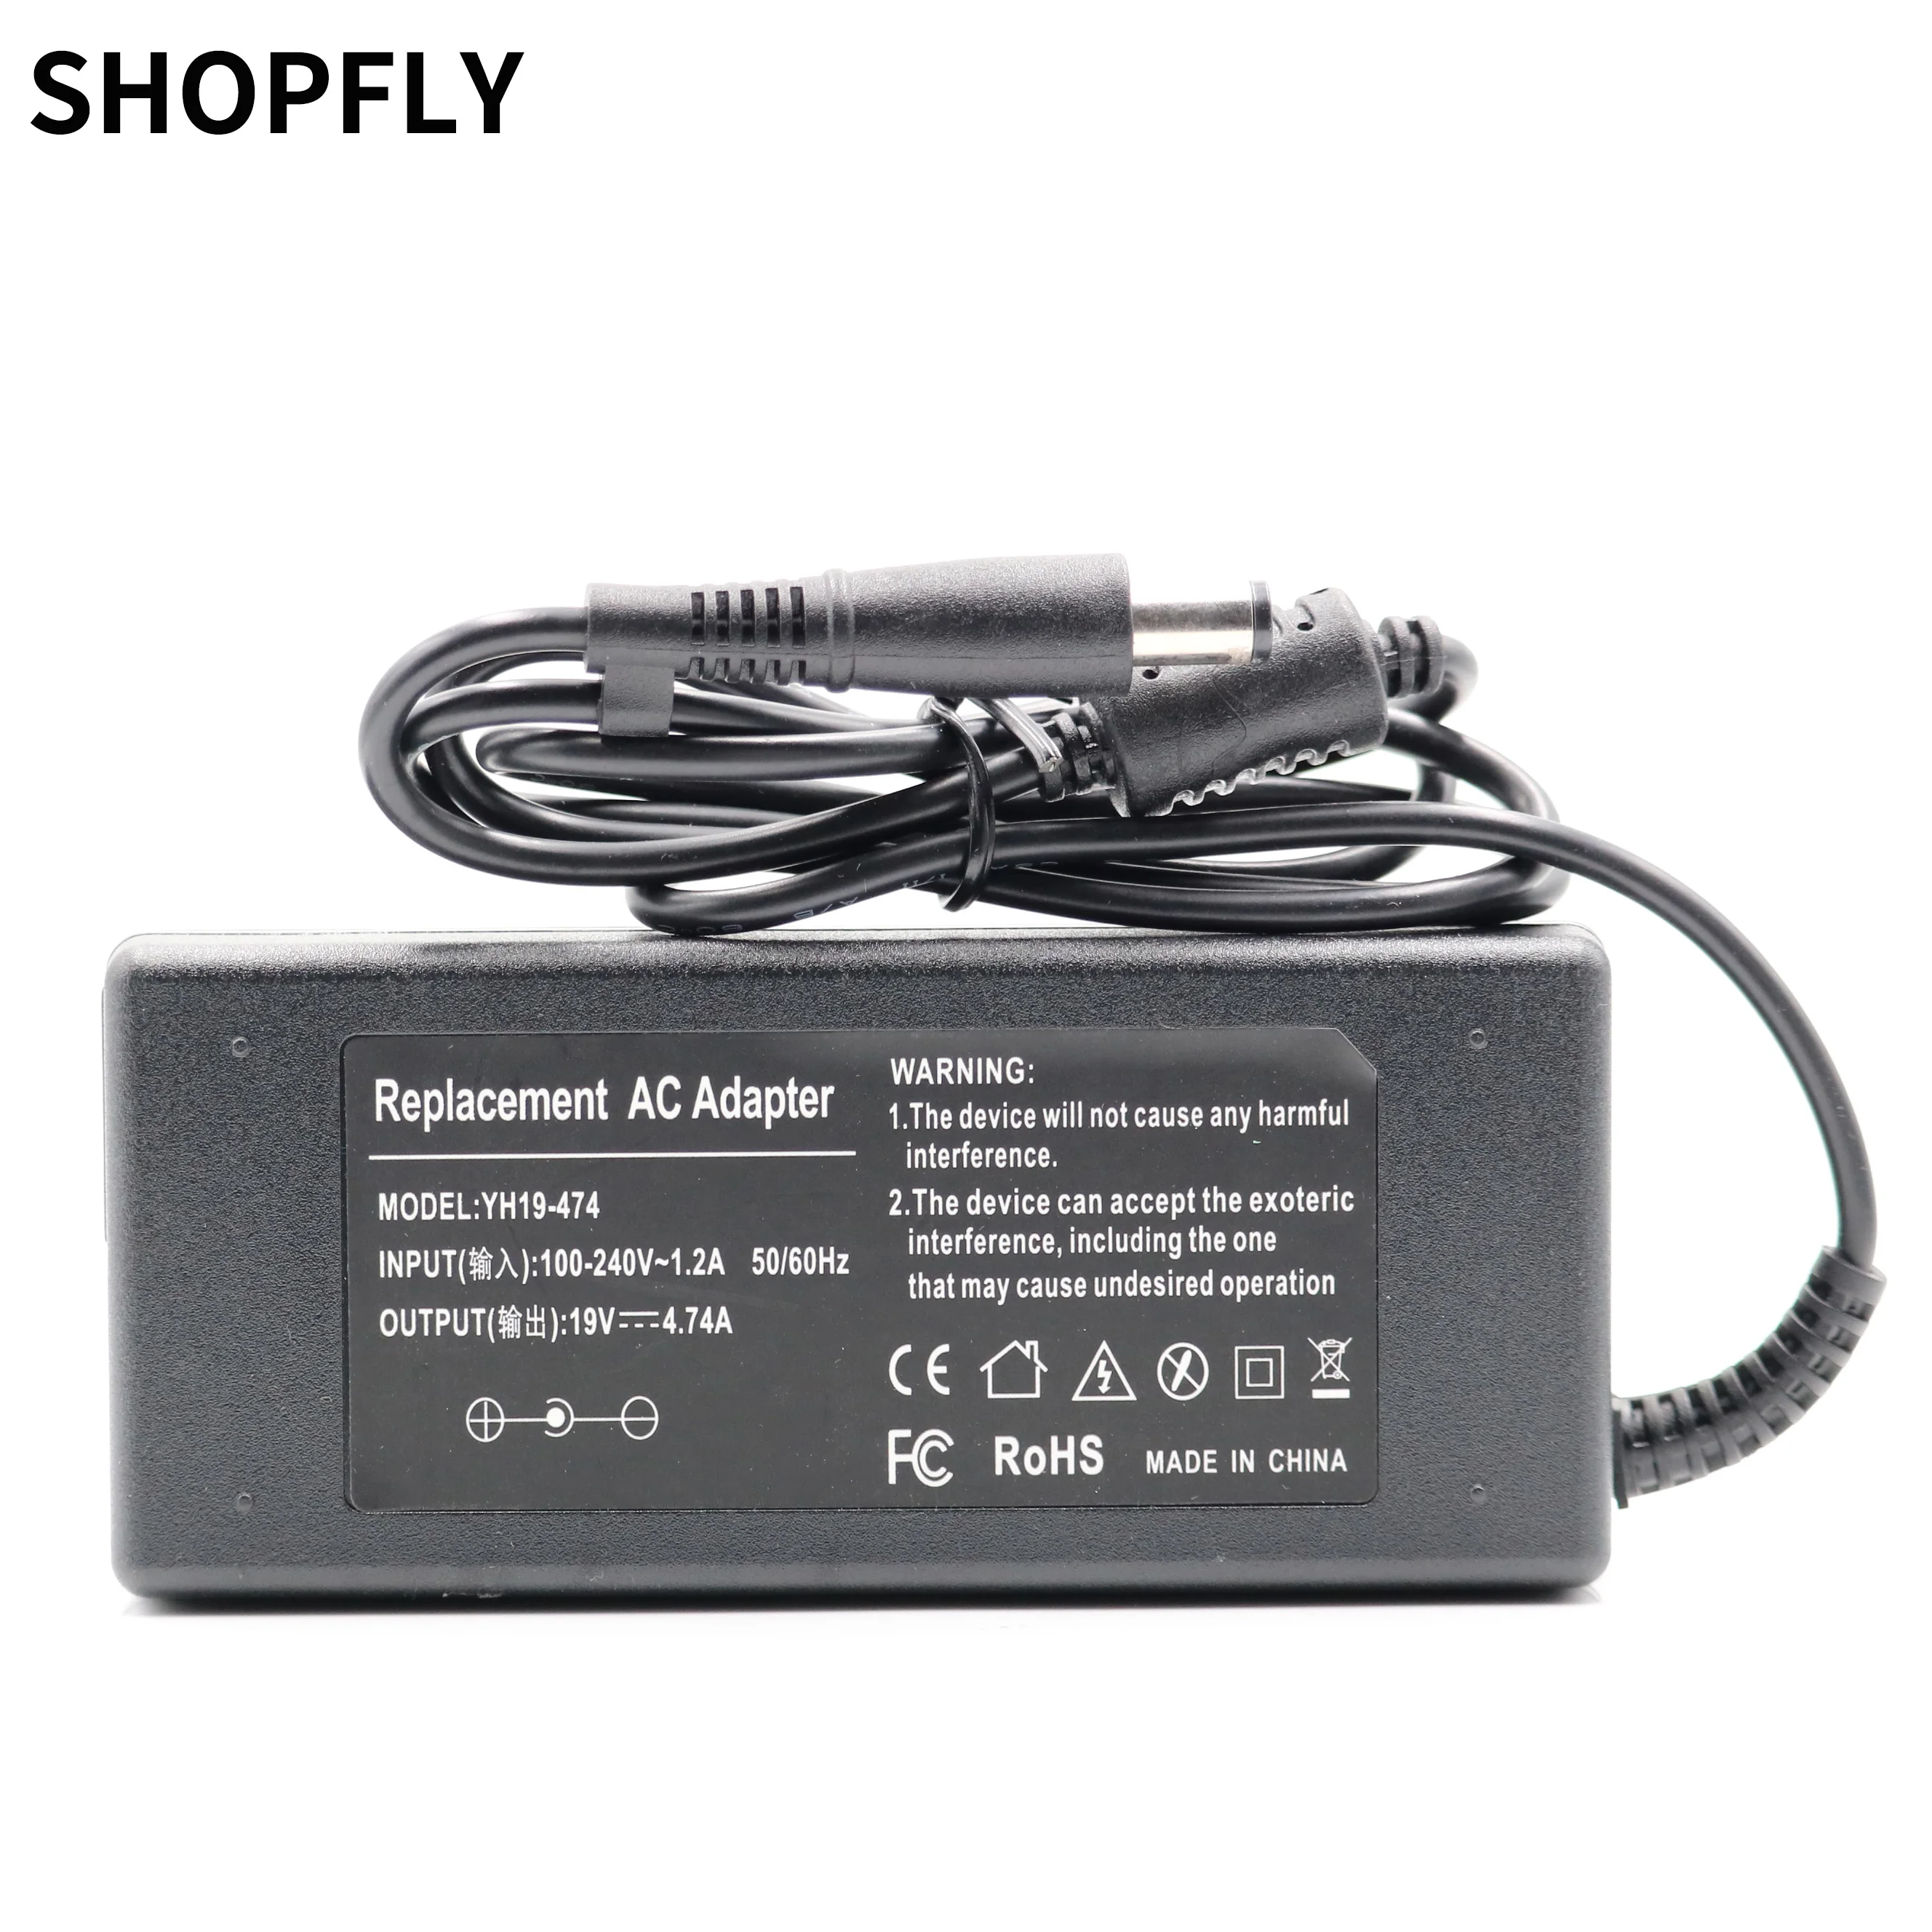 

90W 19V 4.74A AC Laptop Adapter Replacements Charger Fit for HP Pavilion DV4 DV5 DV7 G60 Notebook Replacements Adapter